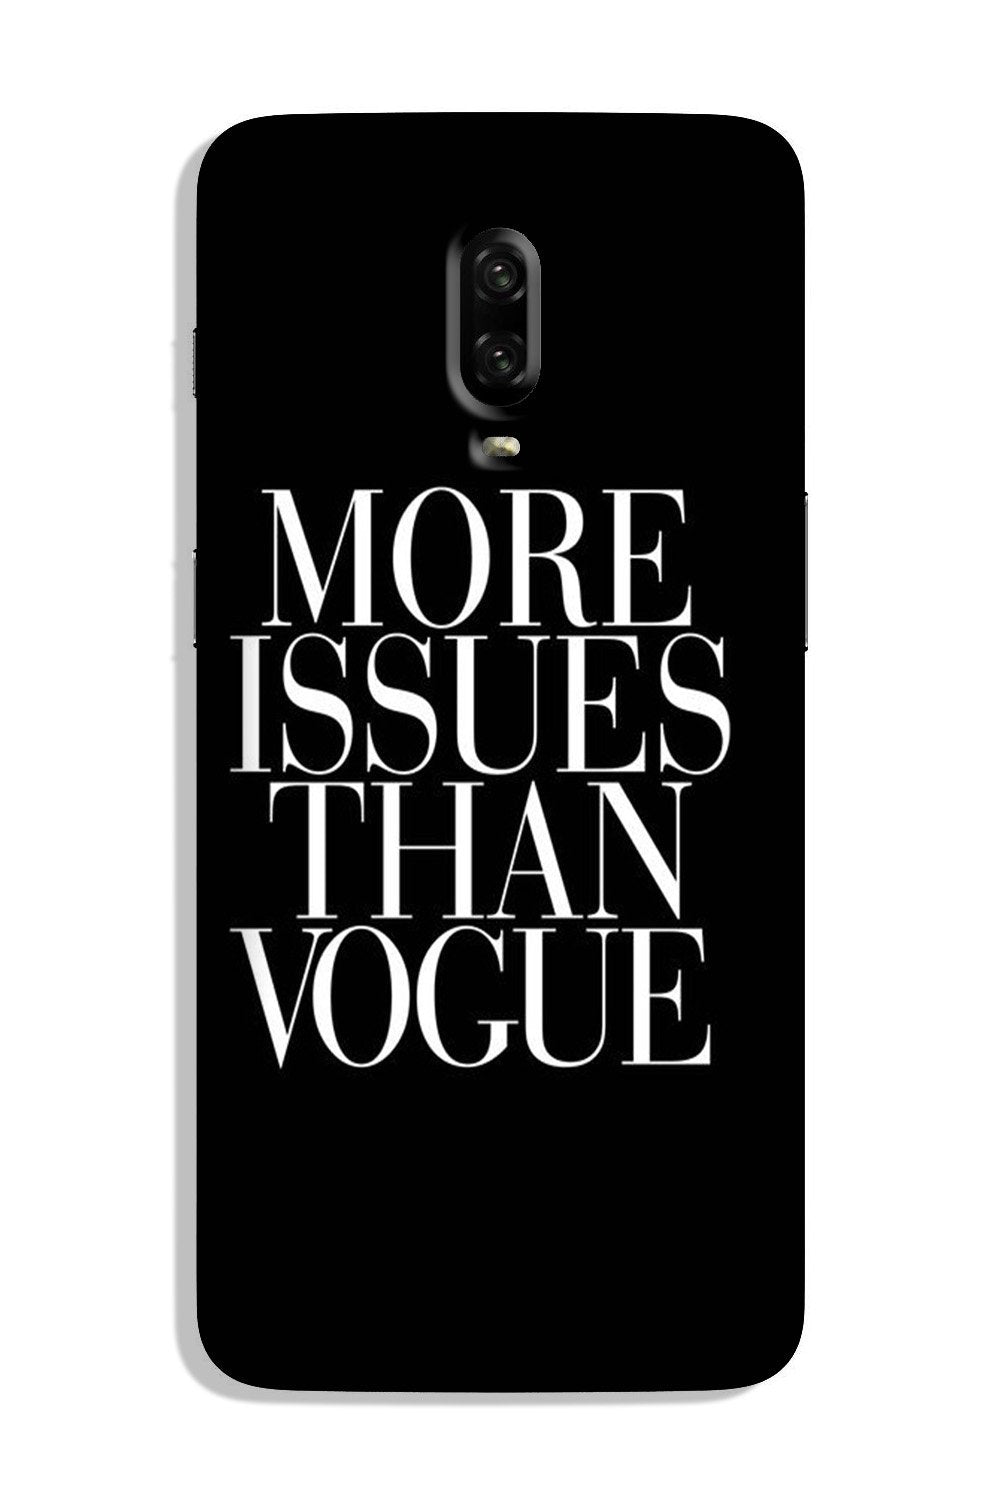 More Issues than Vague Case for OnePlus 6T